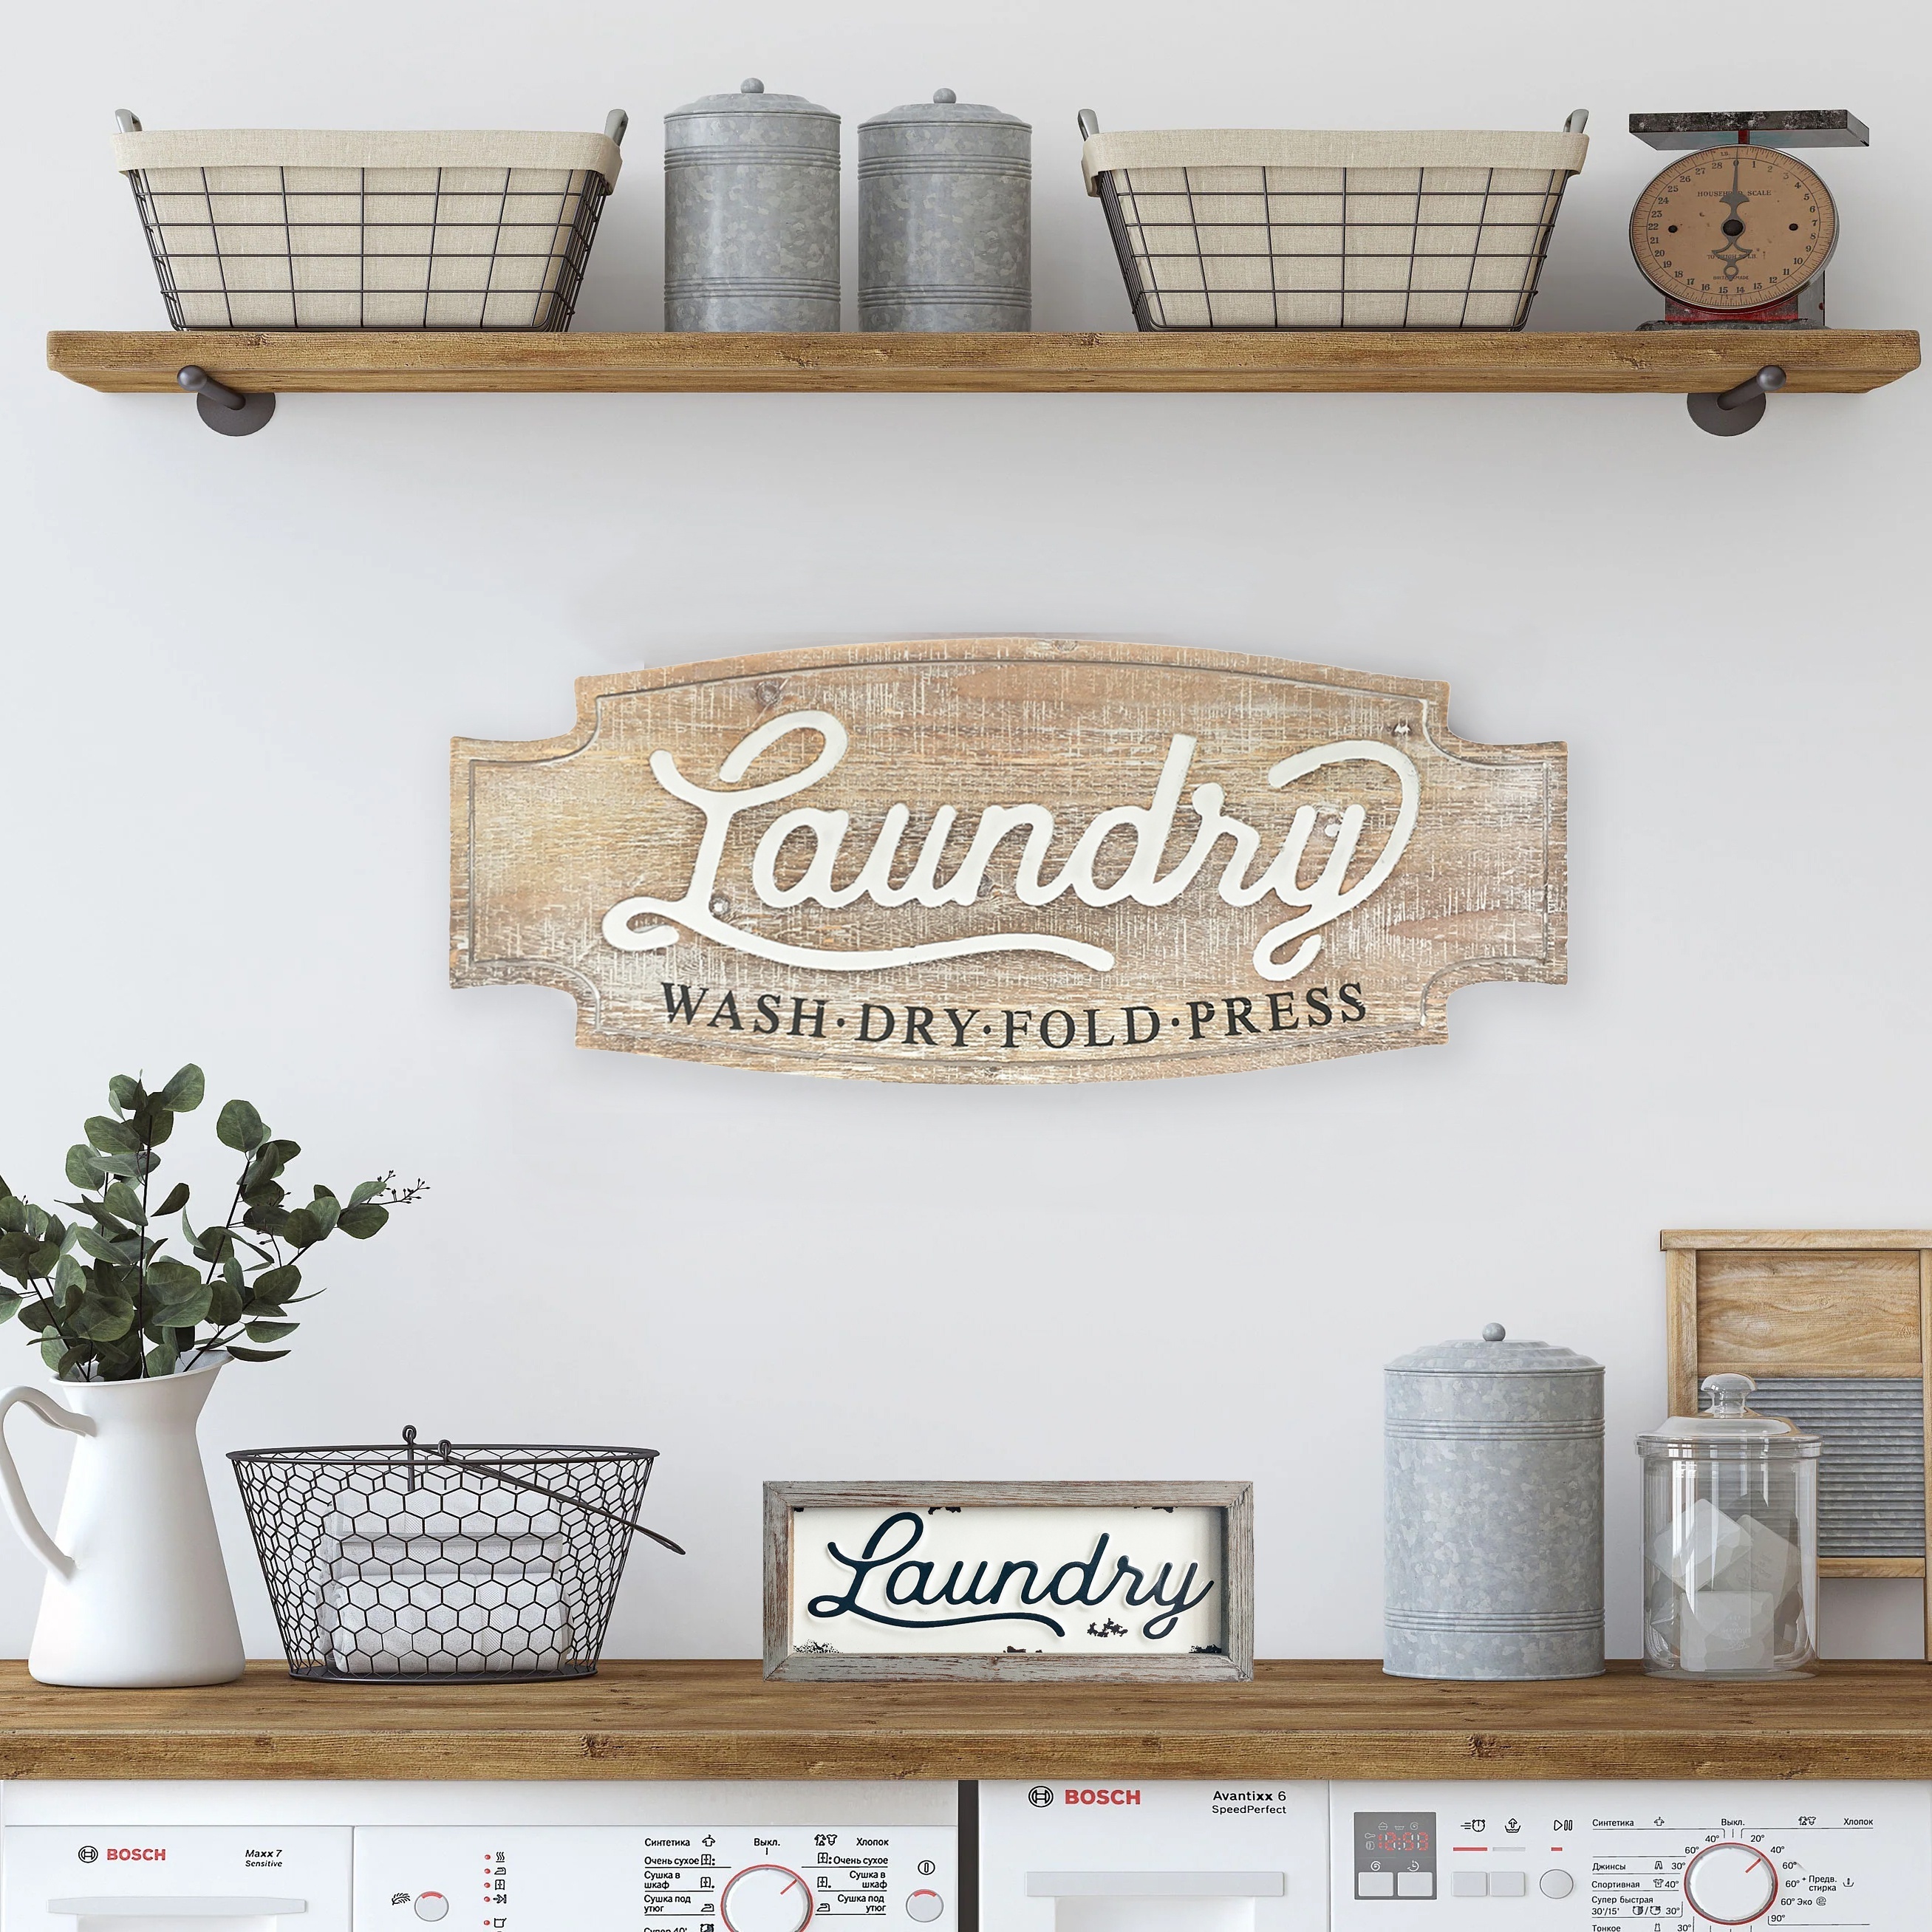 1pc Laundry Sign, Wooden Laundry Box Signs Wall Decor, Rustic Embossed Retro Metal And Wood Framed Laundry Sign, Modern Farmhouse Wall Hanging Art Laundry Sign Home Decor, room Decor, 30.48x12.7x4.06 Cm